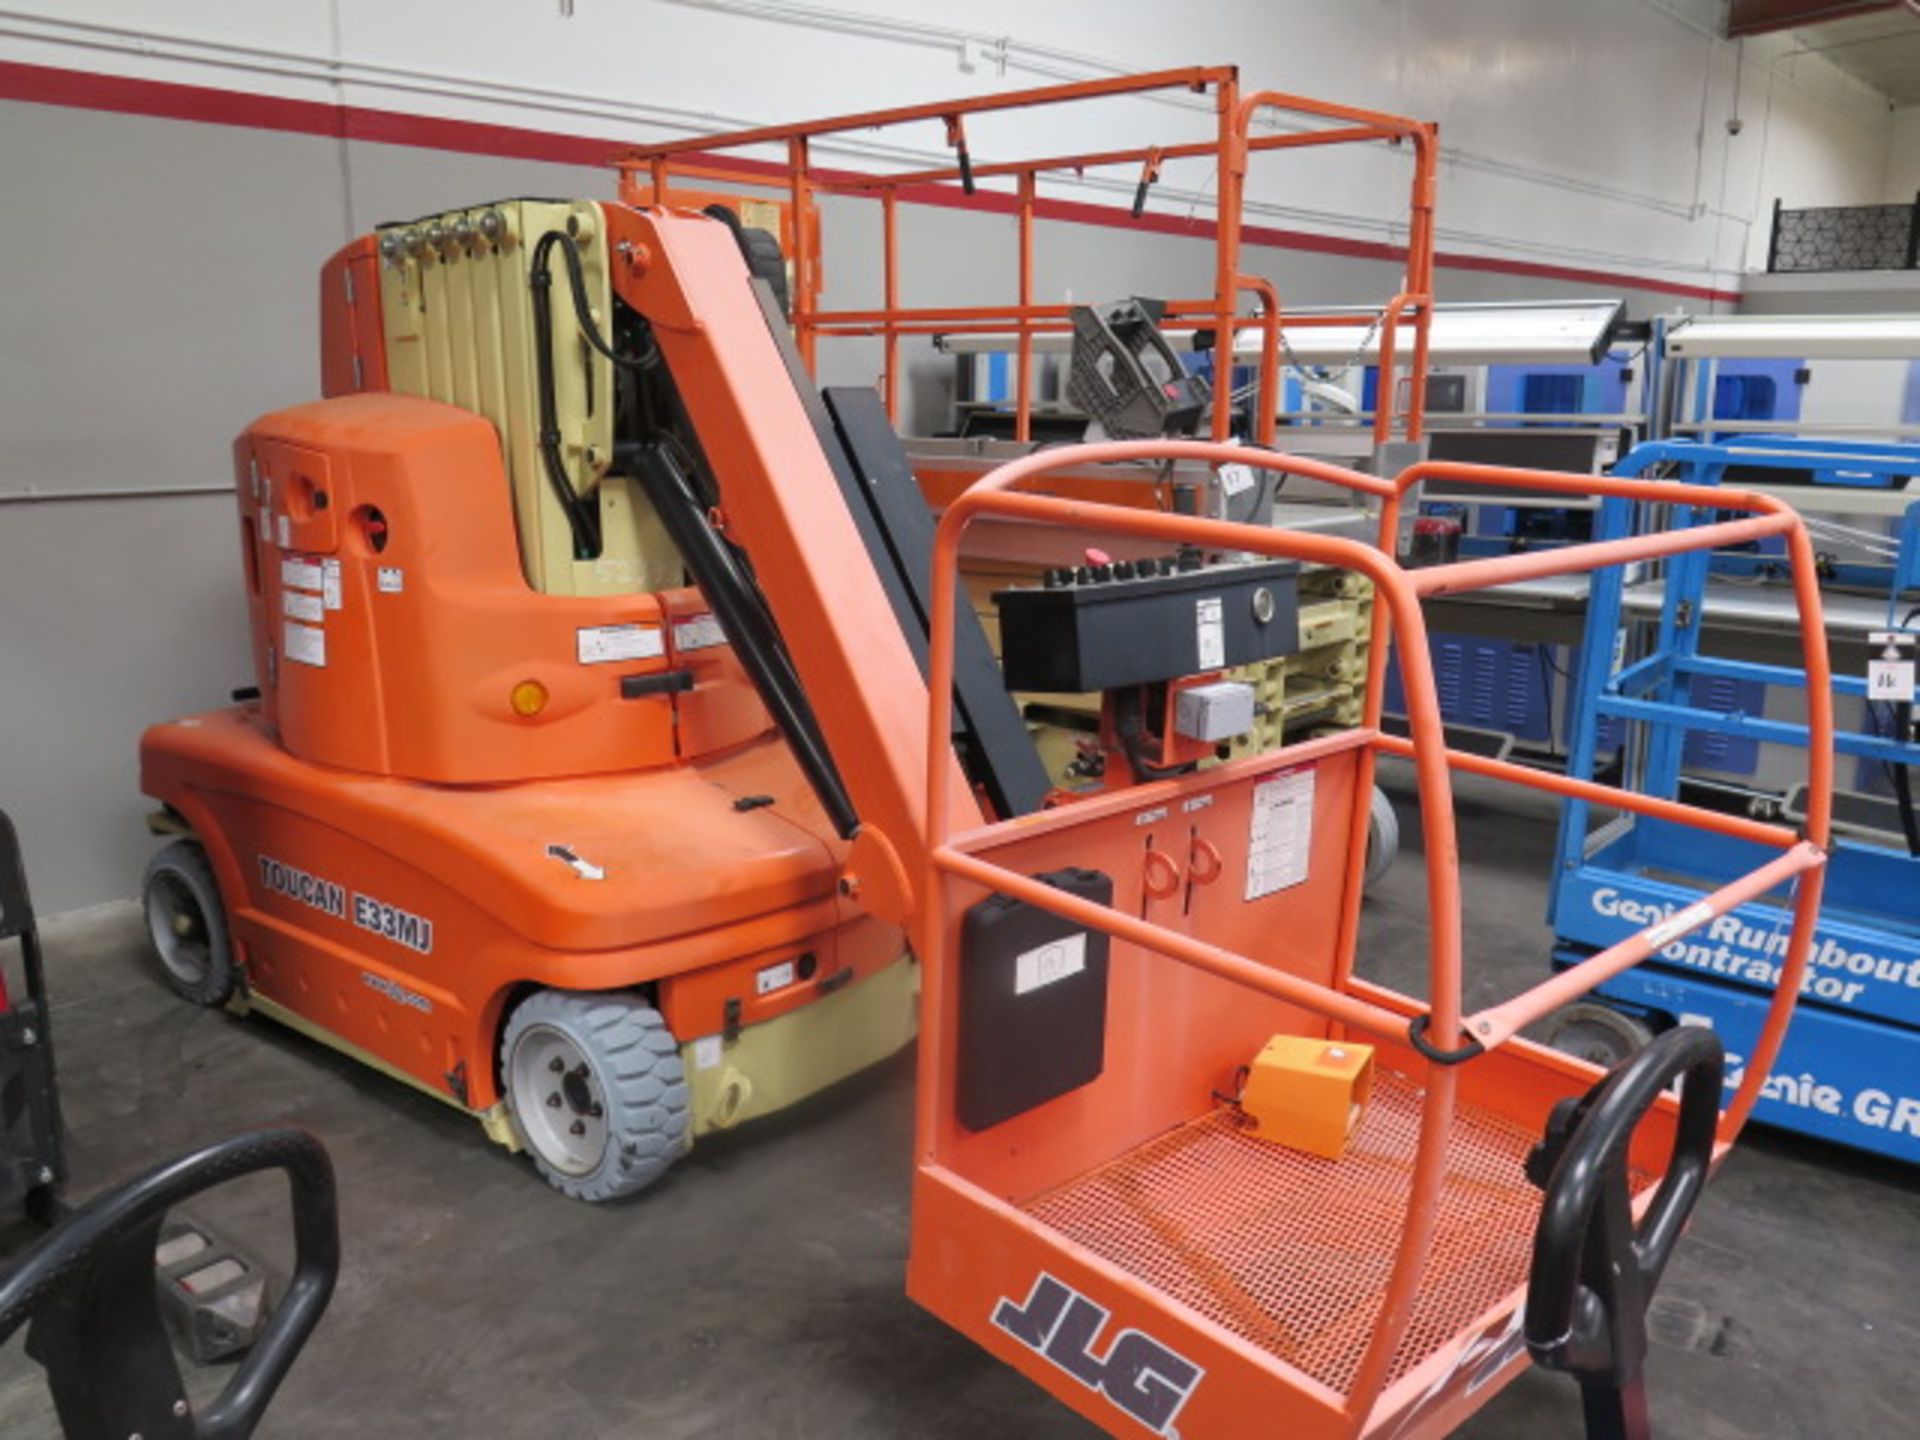 2013 JLG Toucan E33MJ Electric Boom Lift s/n A300052335 w/ 32.75' Max Platform Height, SOLD AS IS - Image 2 of 19